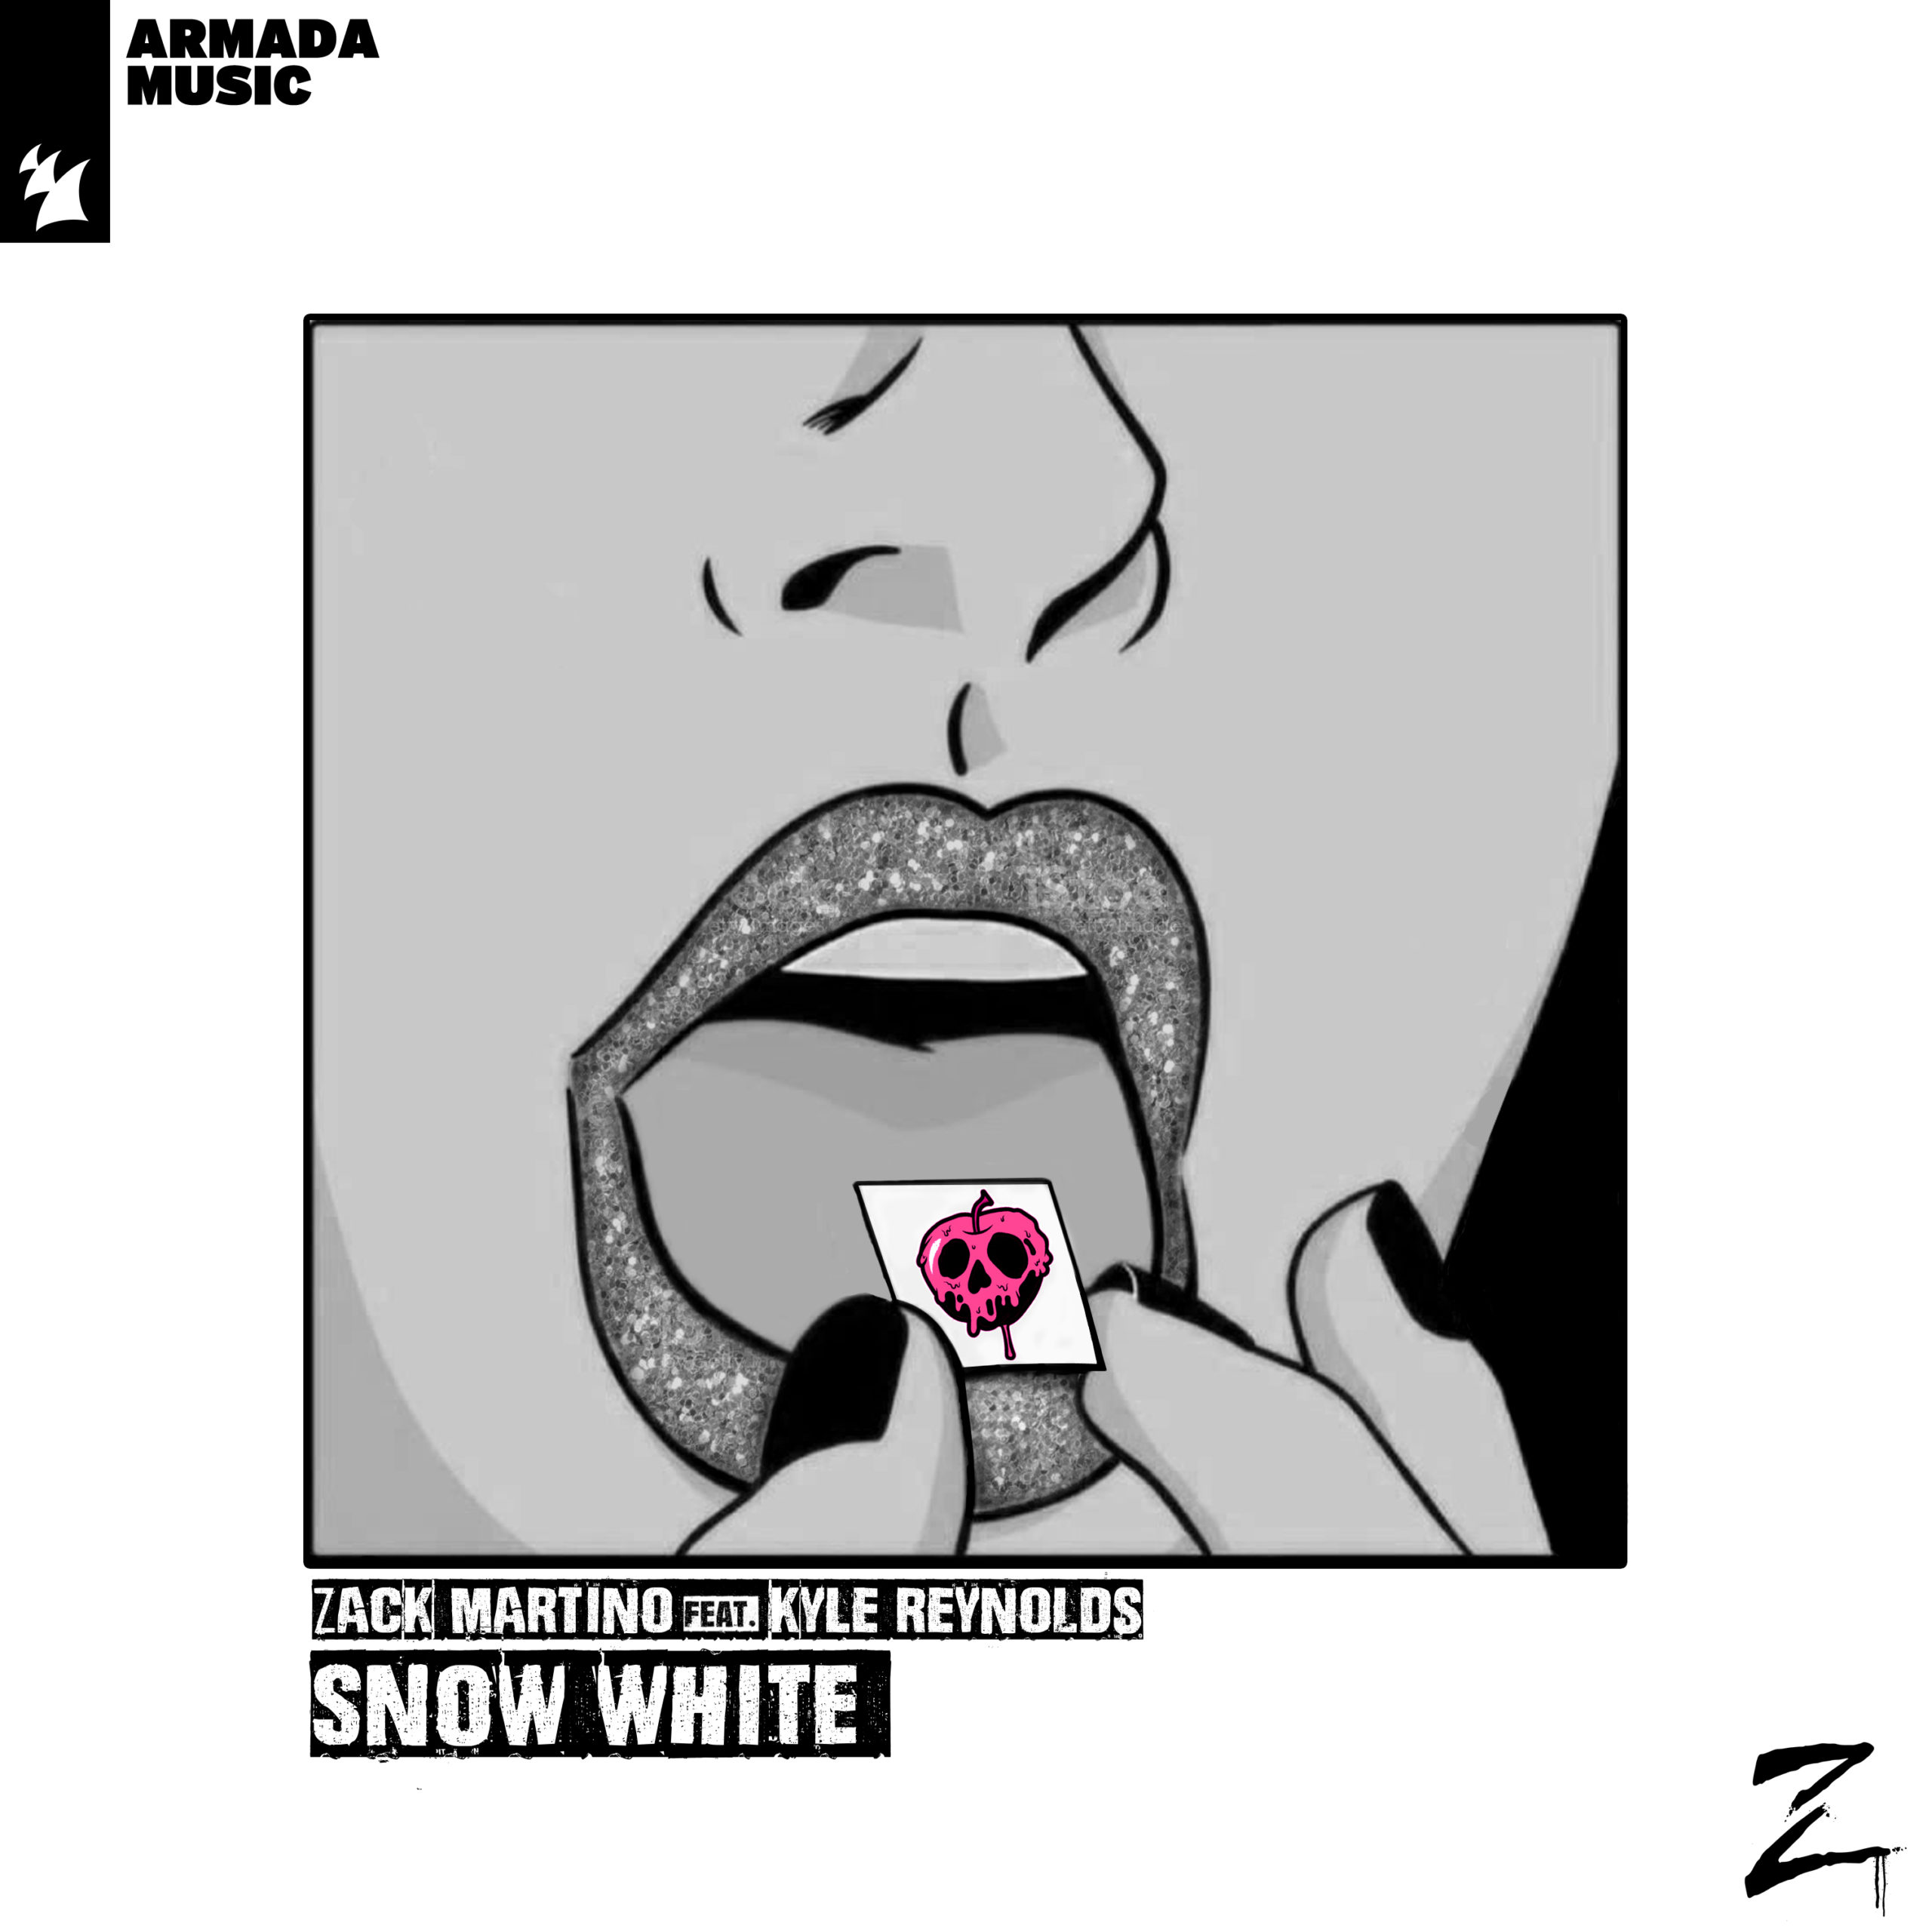 Zack Martino Blends Pop Punk And Electronic Via Armada Music-Signed Single ‘Snow White’